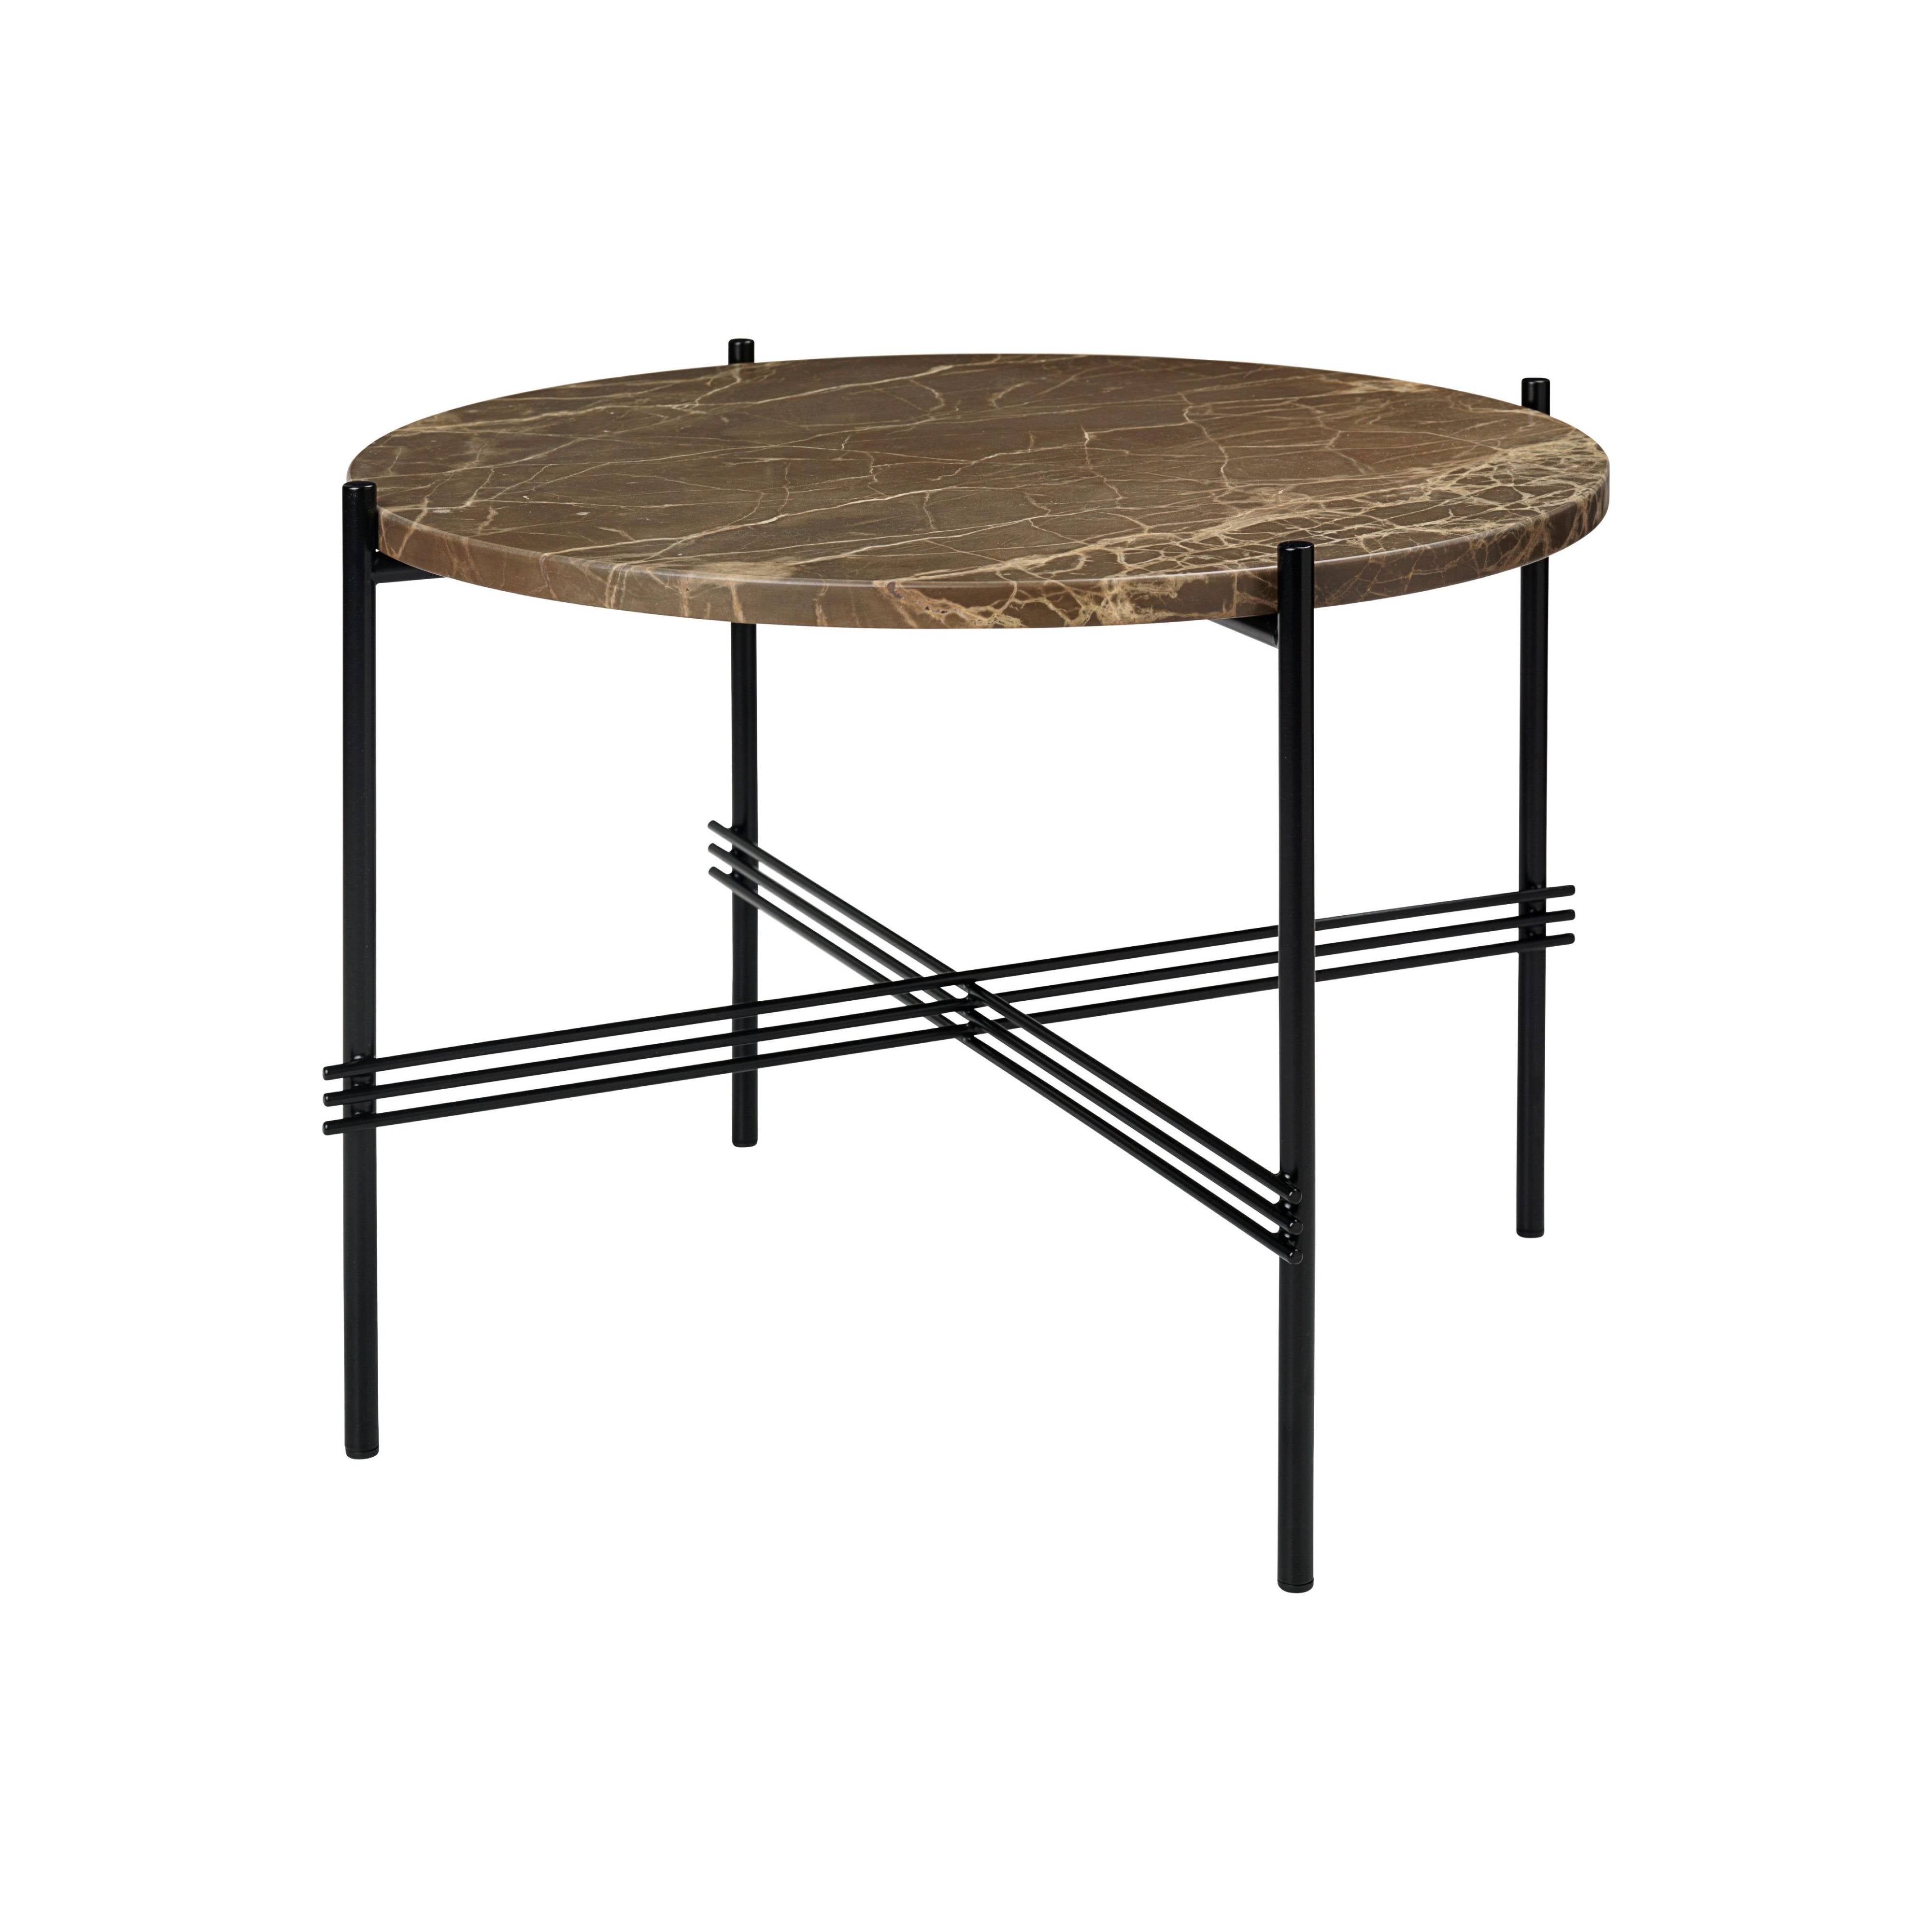 TS Round Coffee Table: Small - 21.7